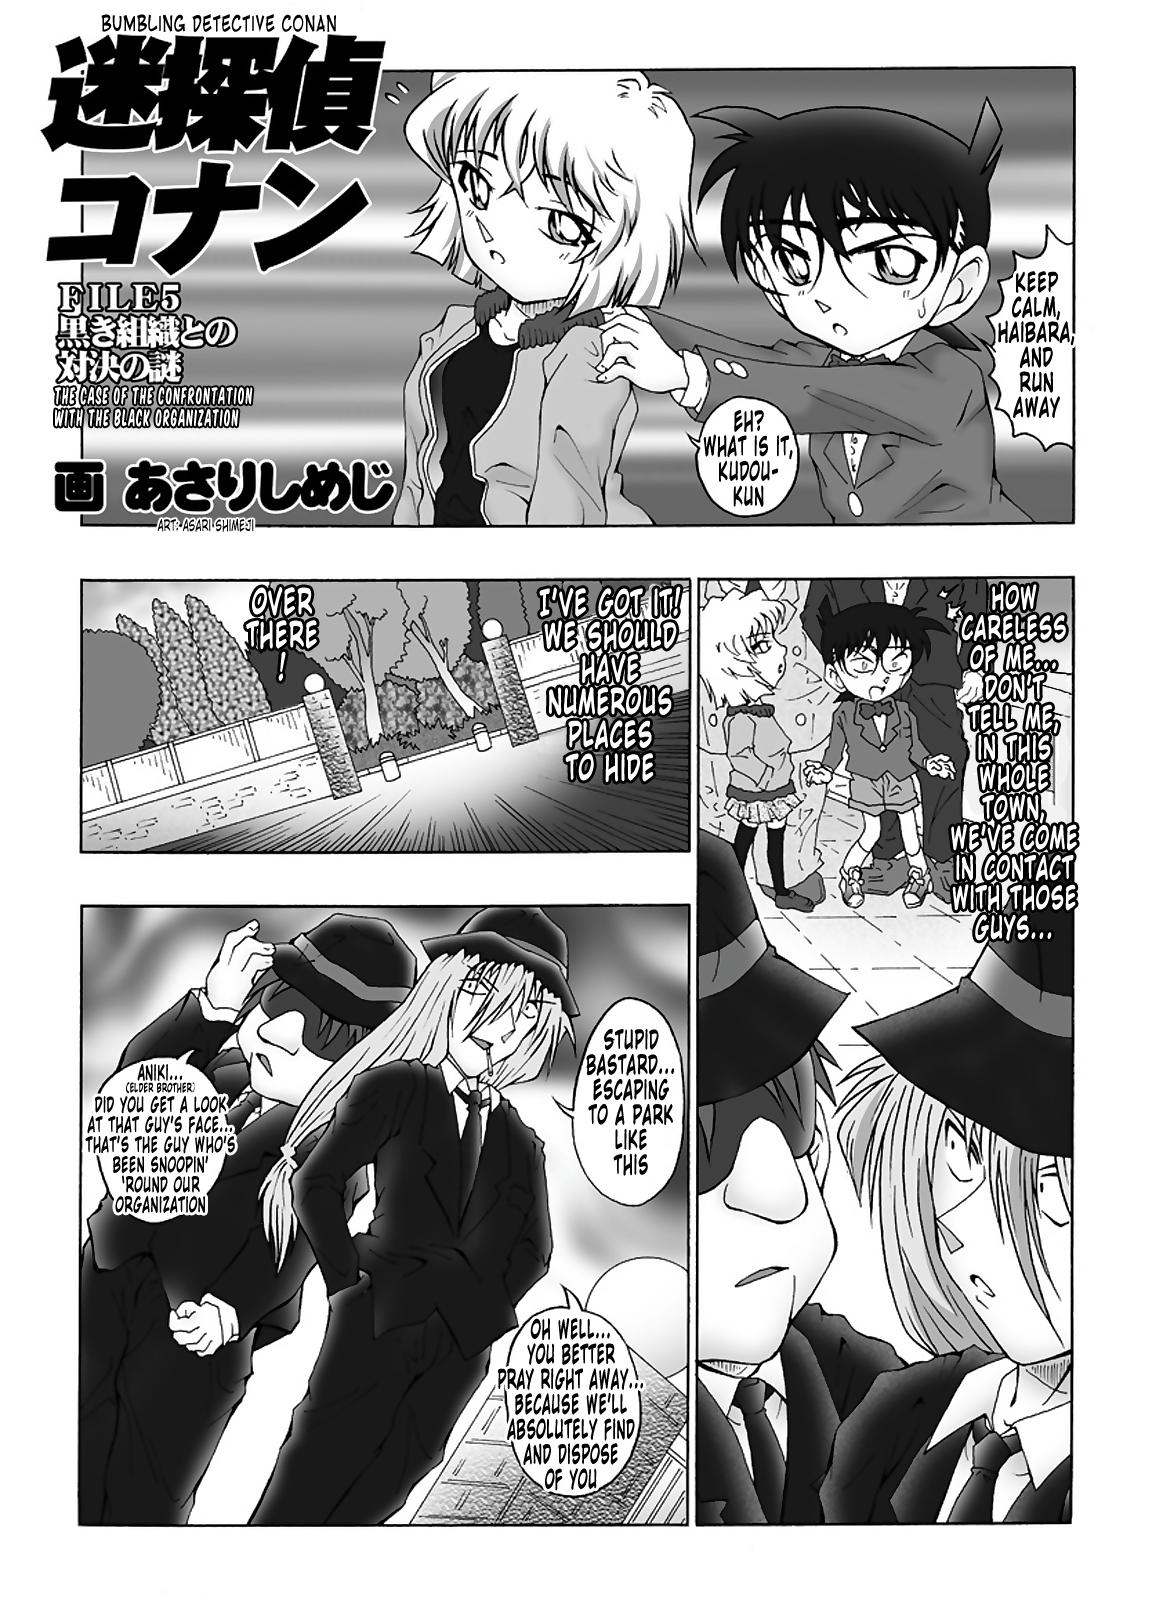 Best Blow Jobs Ever Bumbling Detective Conan - File 5: The Case of The Confrontation with The Black Organiztion - Detective conan Speculum - Page 4